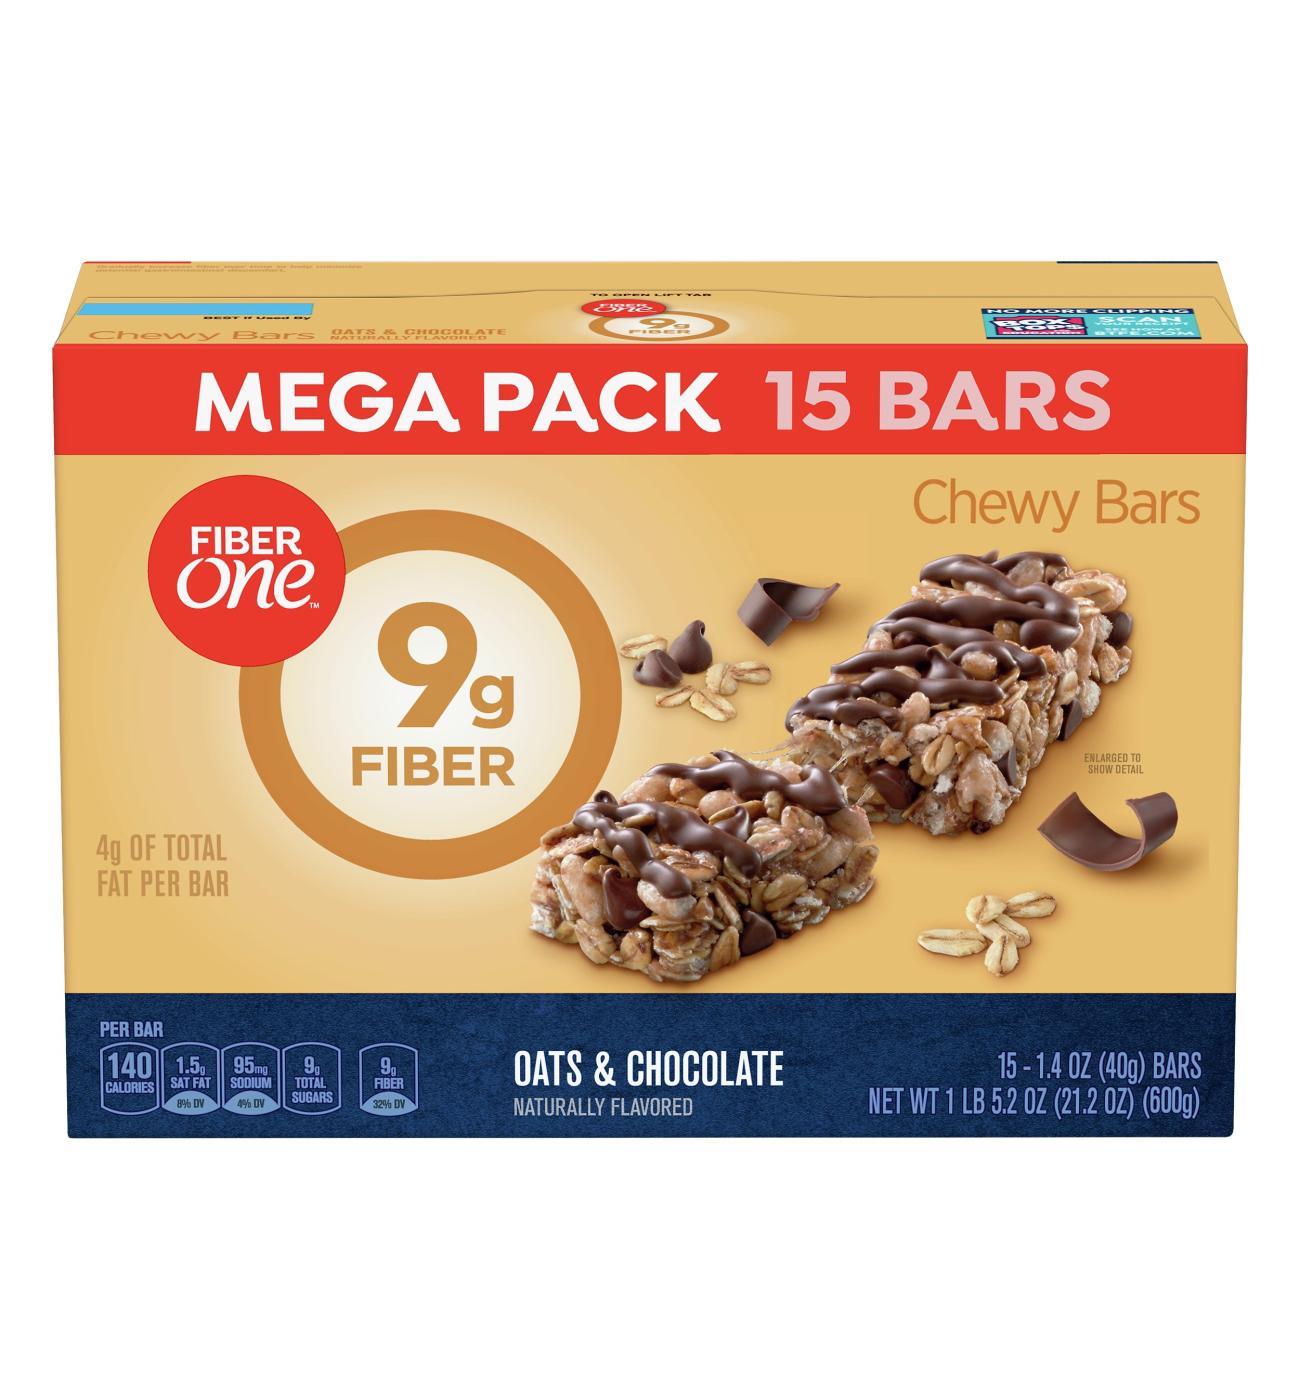 Fiber One Oats & Chocolate Chewy Bars Mega Pack; image 1 of 2